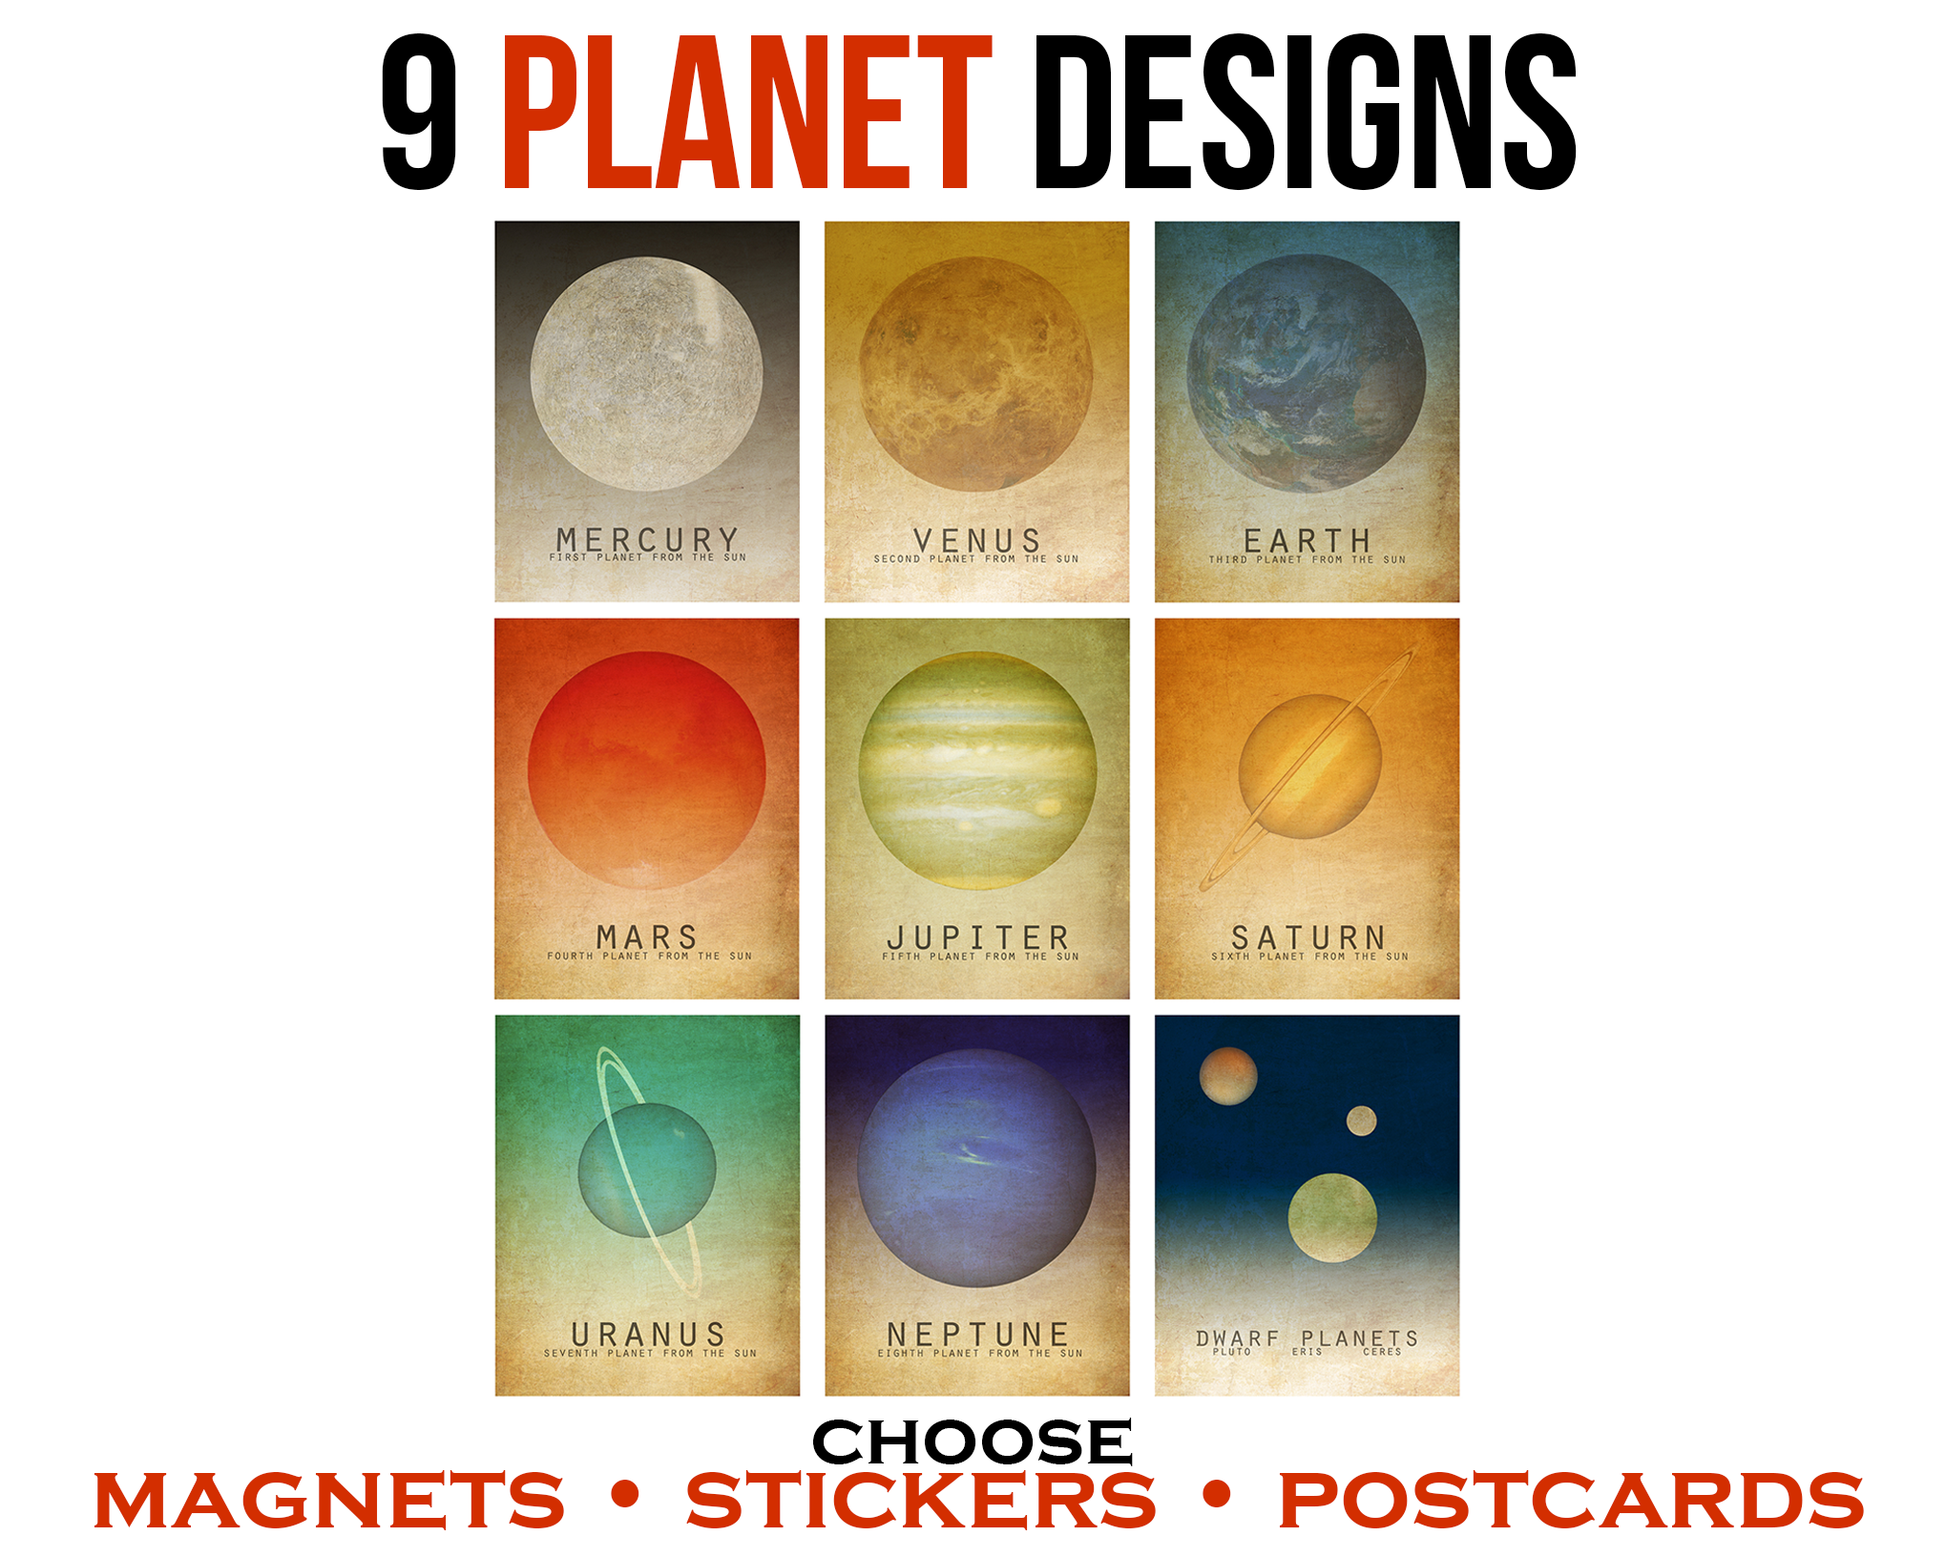 A set of 9 stunning planet designs, available as postcards, stickers, or magnets. Designs include Mercury, Venus, Earth, Mars, Jupiter, Saturn, Uranus, Neptune, and Dwarf Planets (Pluto, Eris, and Ceres).